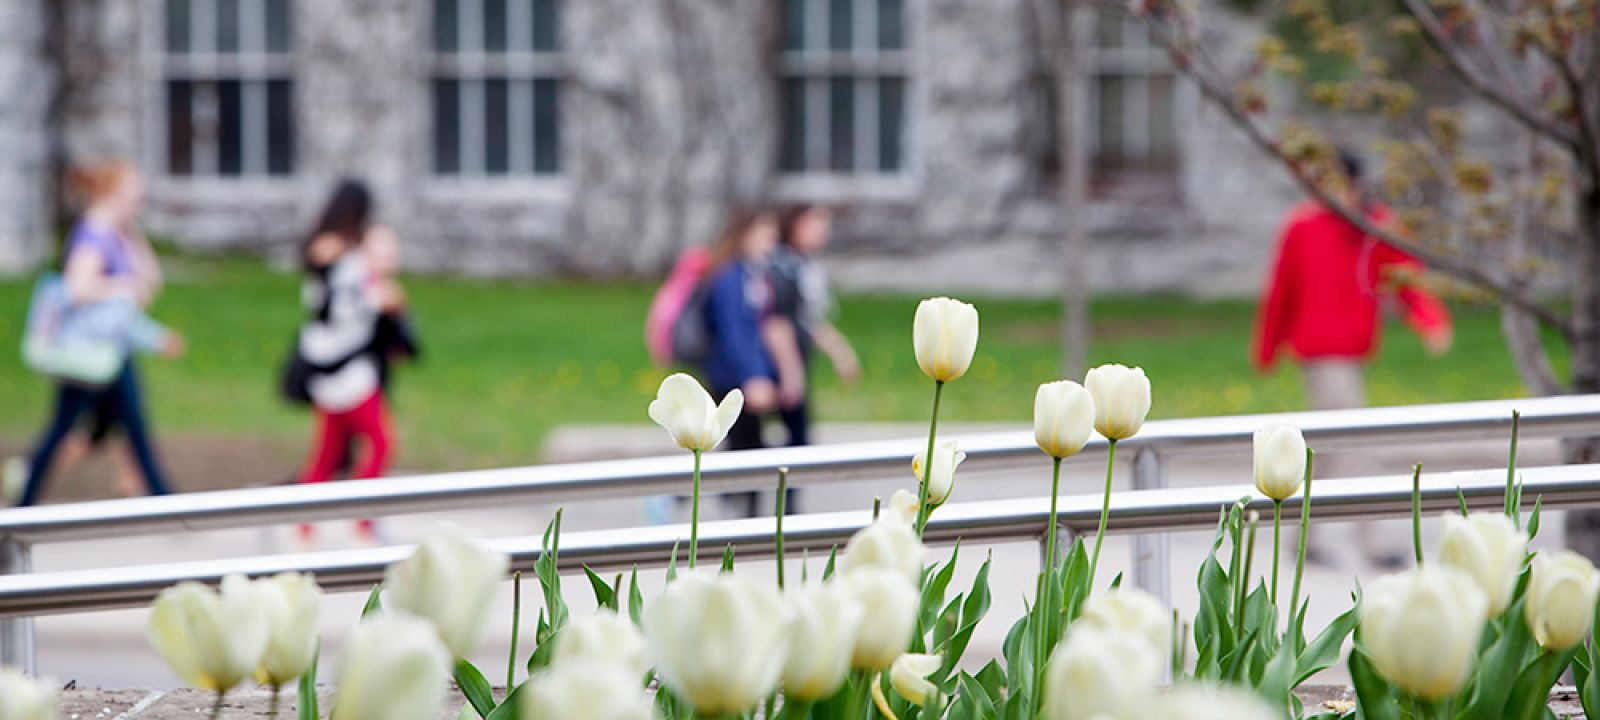 White Tulips with blurred students walking in the background